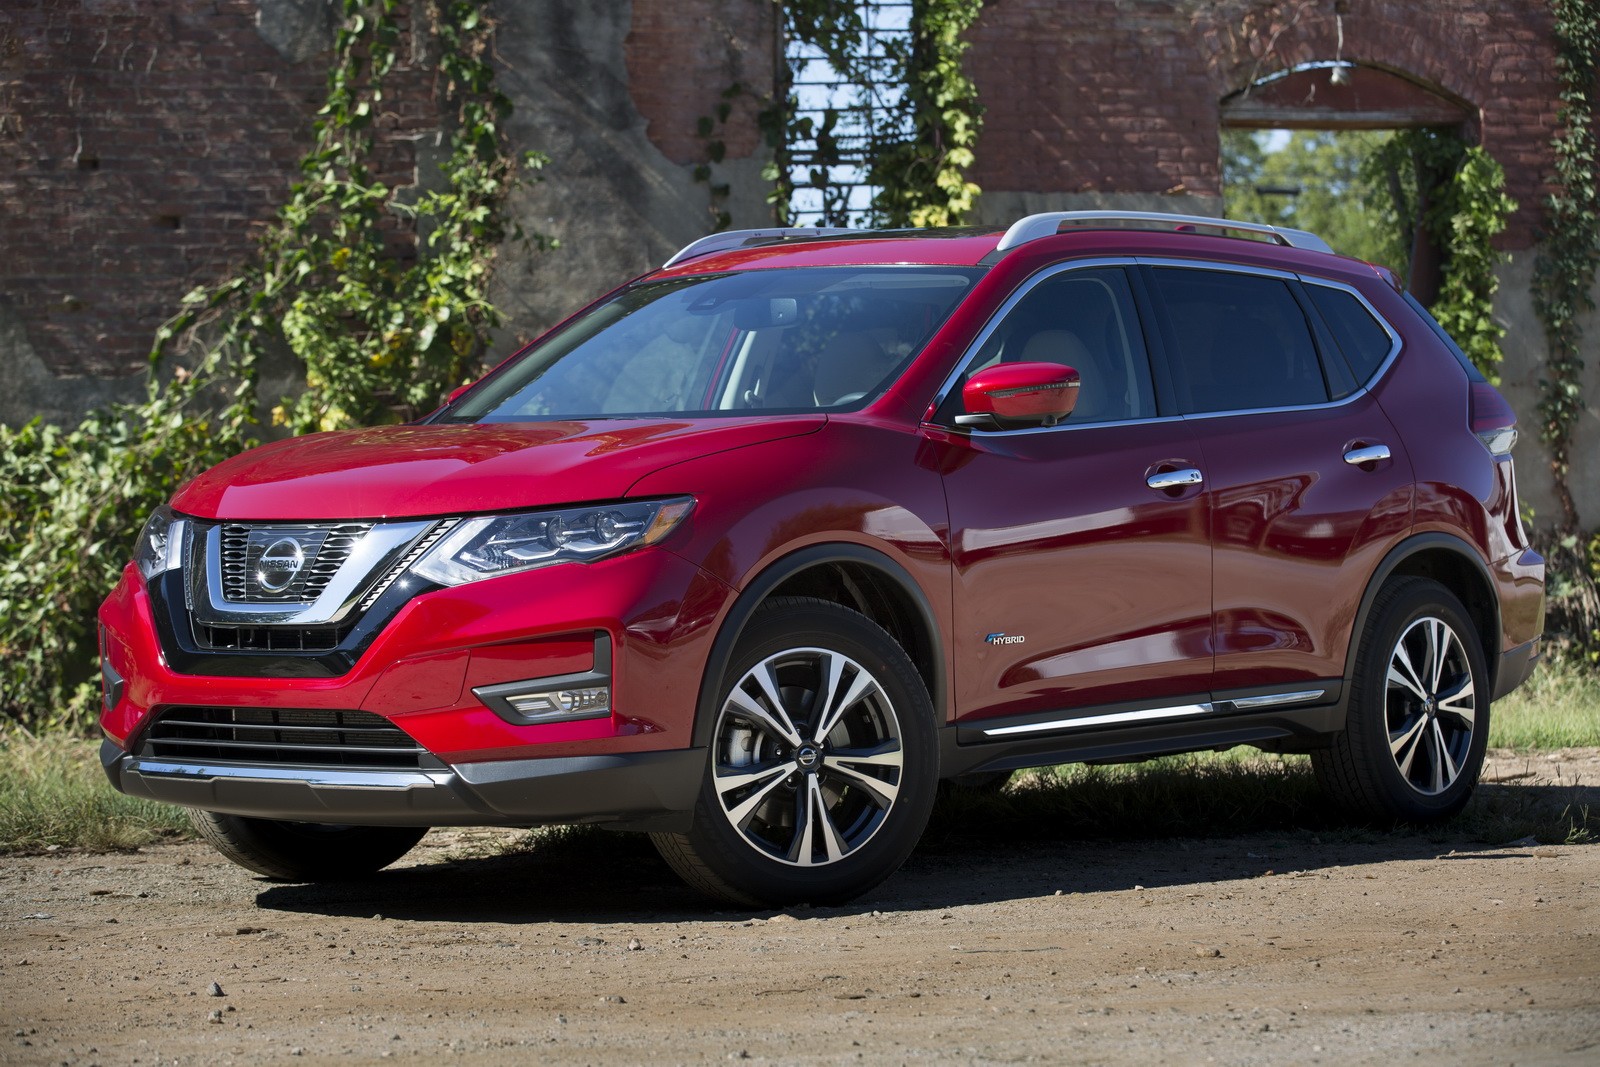 2017 Nissan Rogue Hybrid Now Available to Order, Priced From $26,240 ...